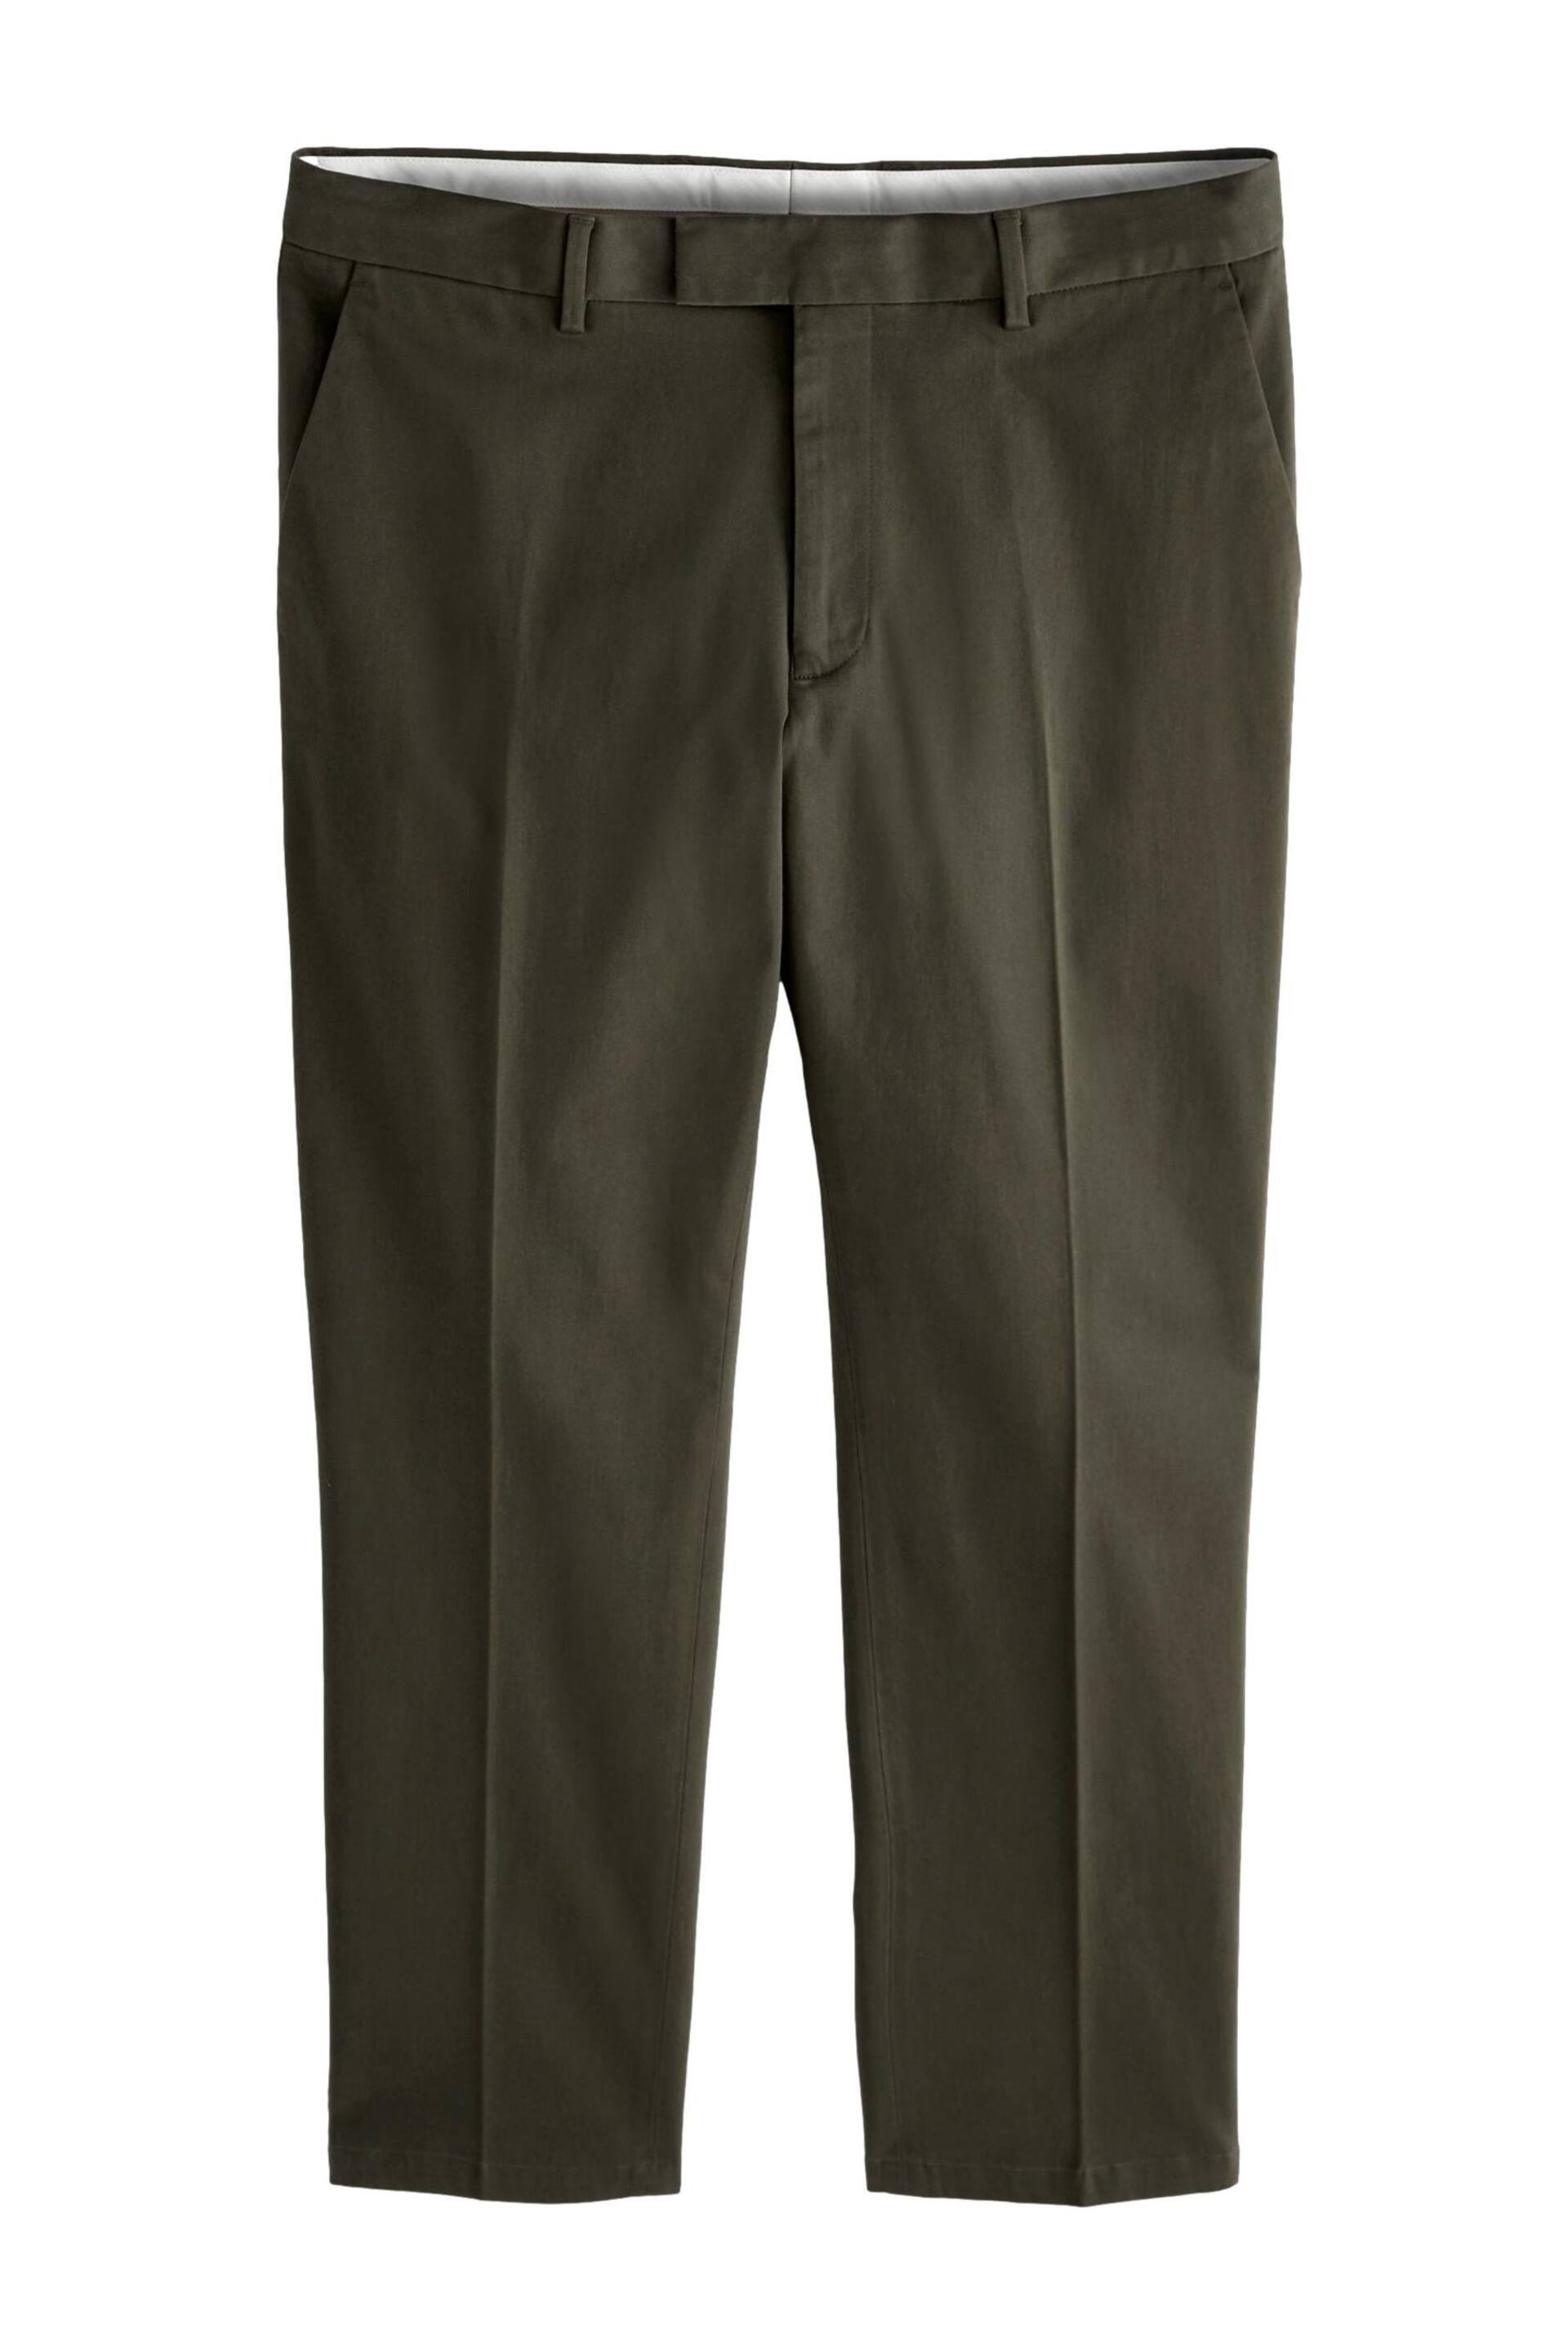 Khaki Green Slim Fit Stretch Sateen Chino Trousers - Image 8 of 11